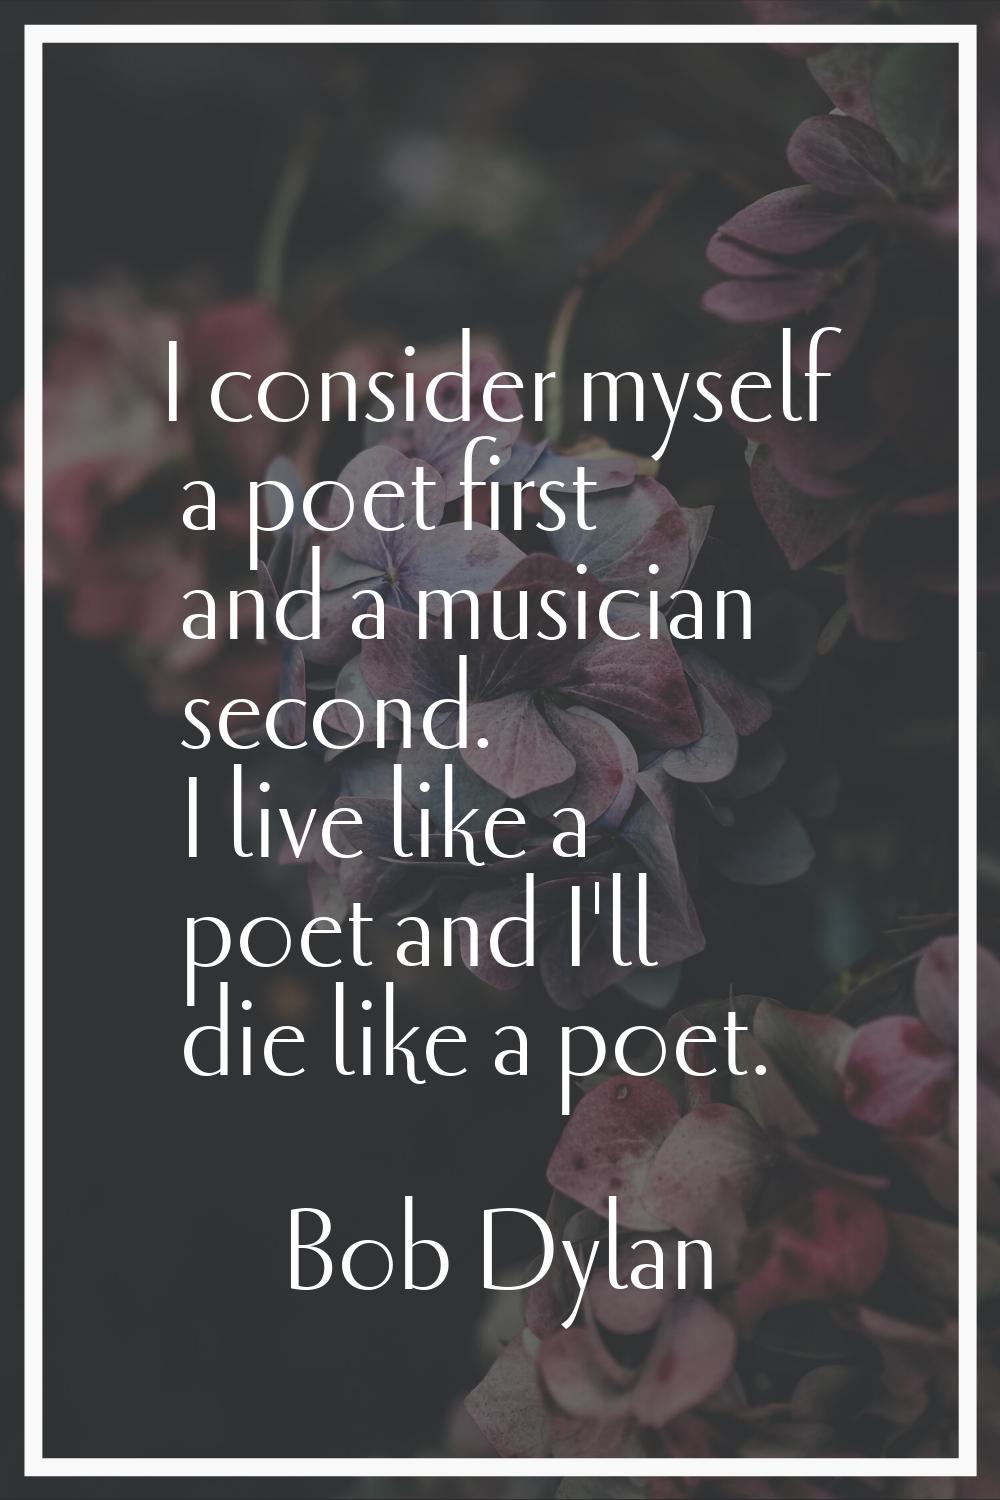 I consider myself a poet first and a musician second. I live like a poet and I'll die like a poet.